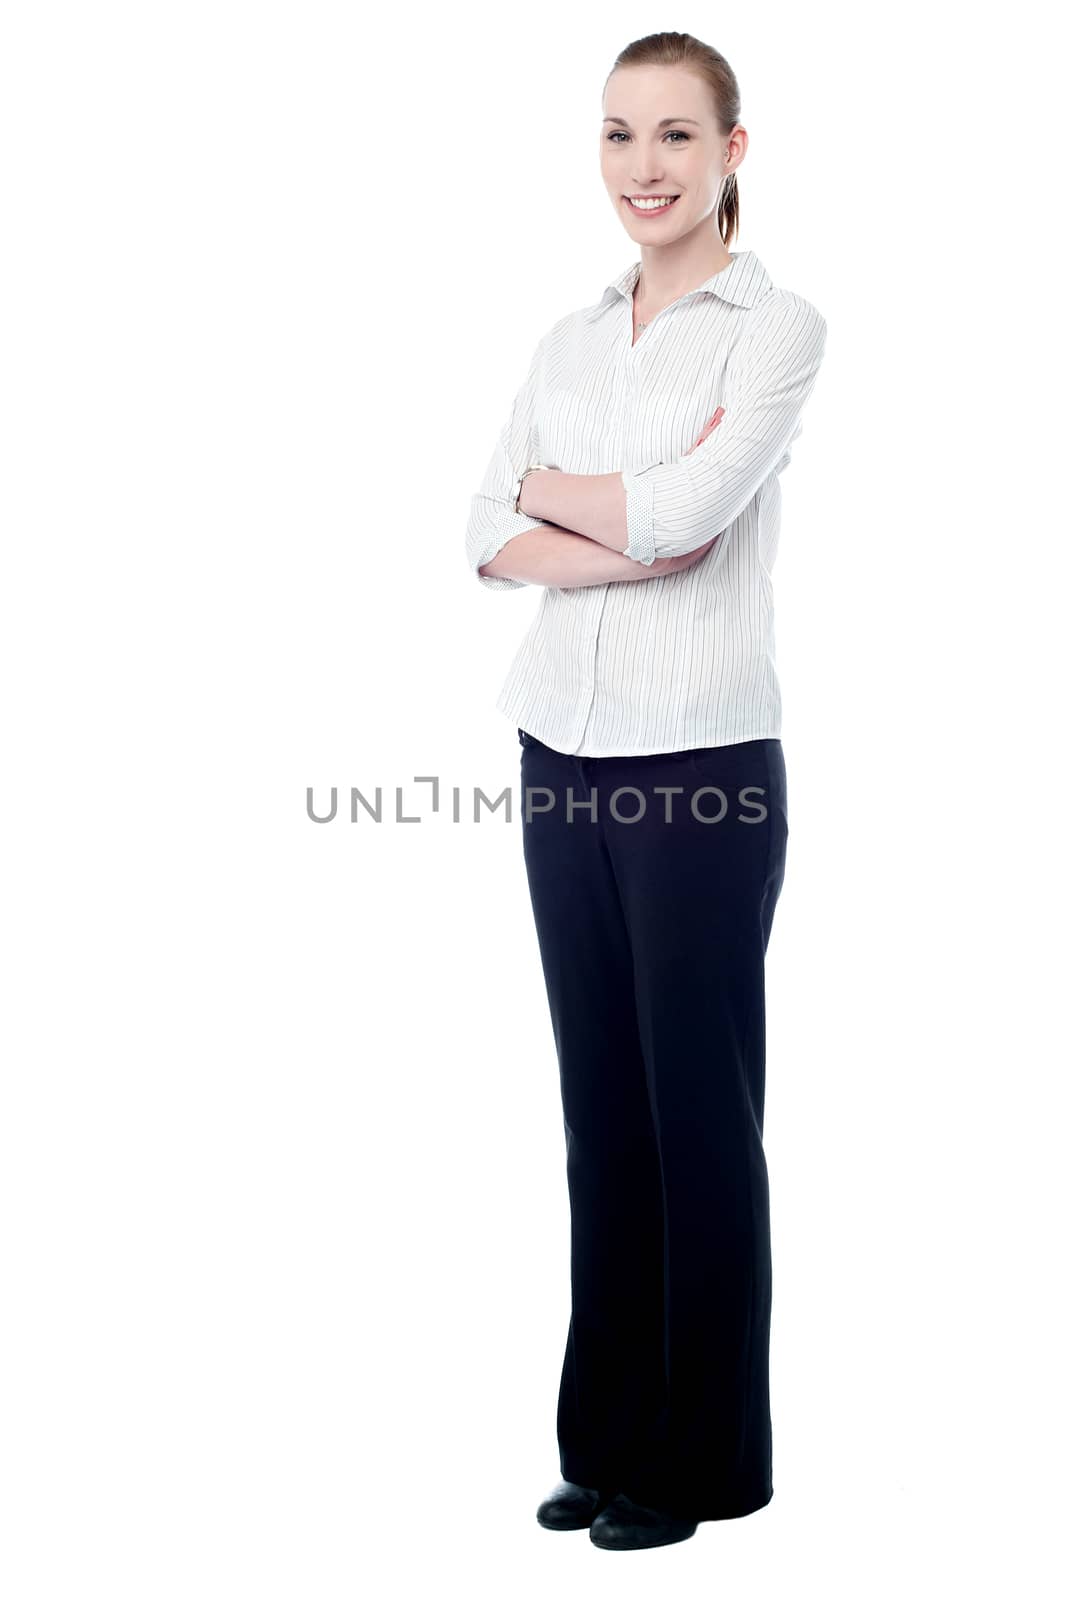 Confident business woman posing by stockyimages